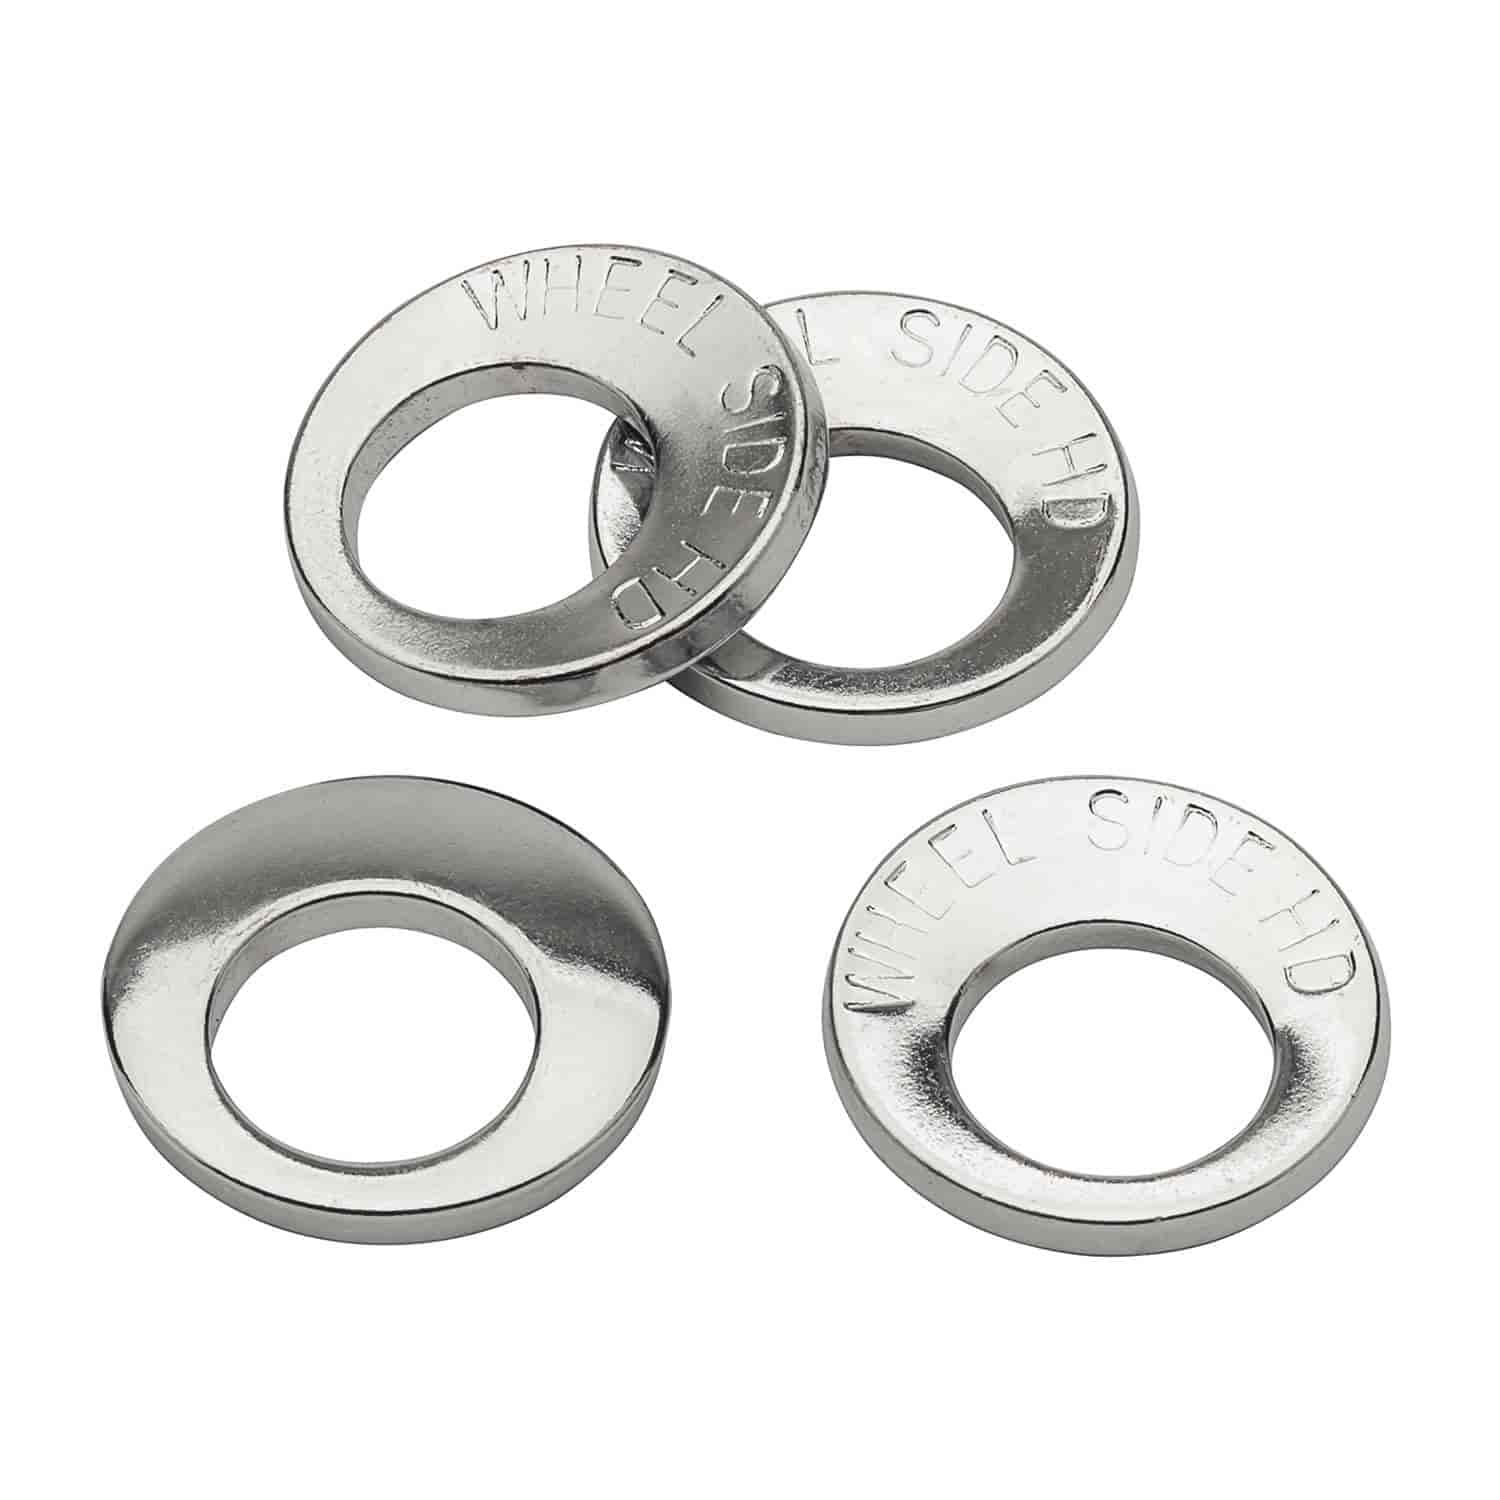 Washers 1.250" O.D.